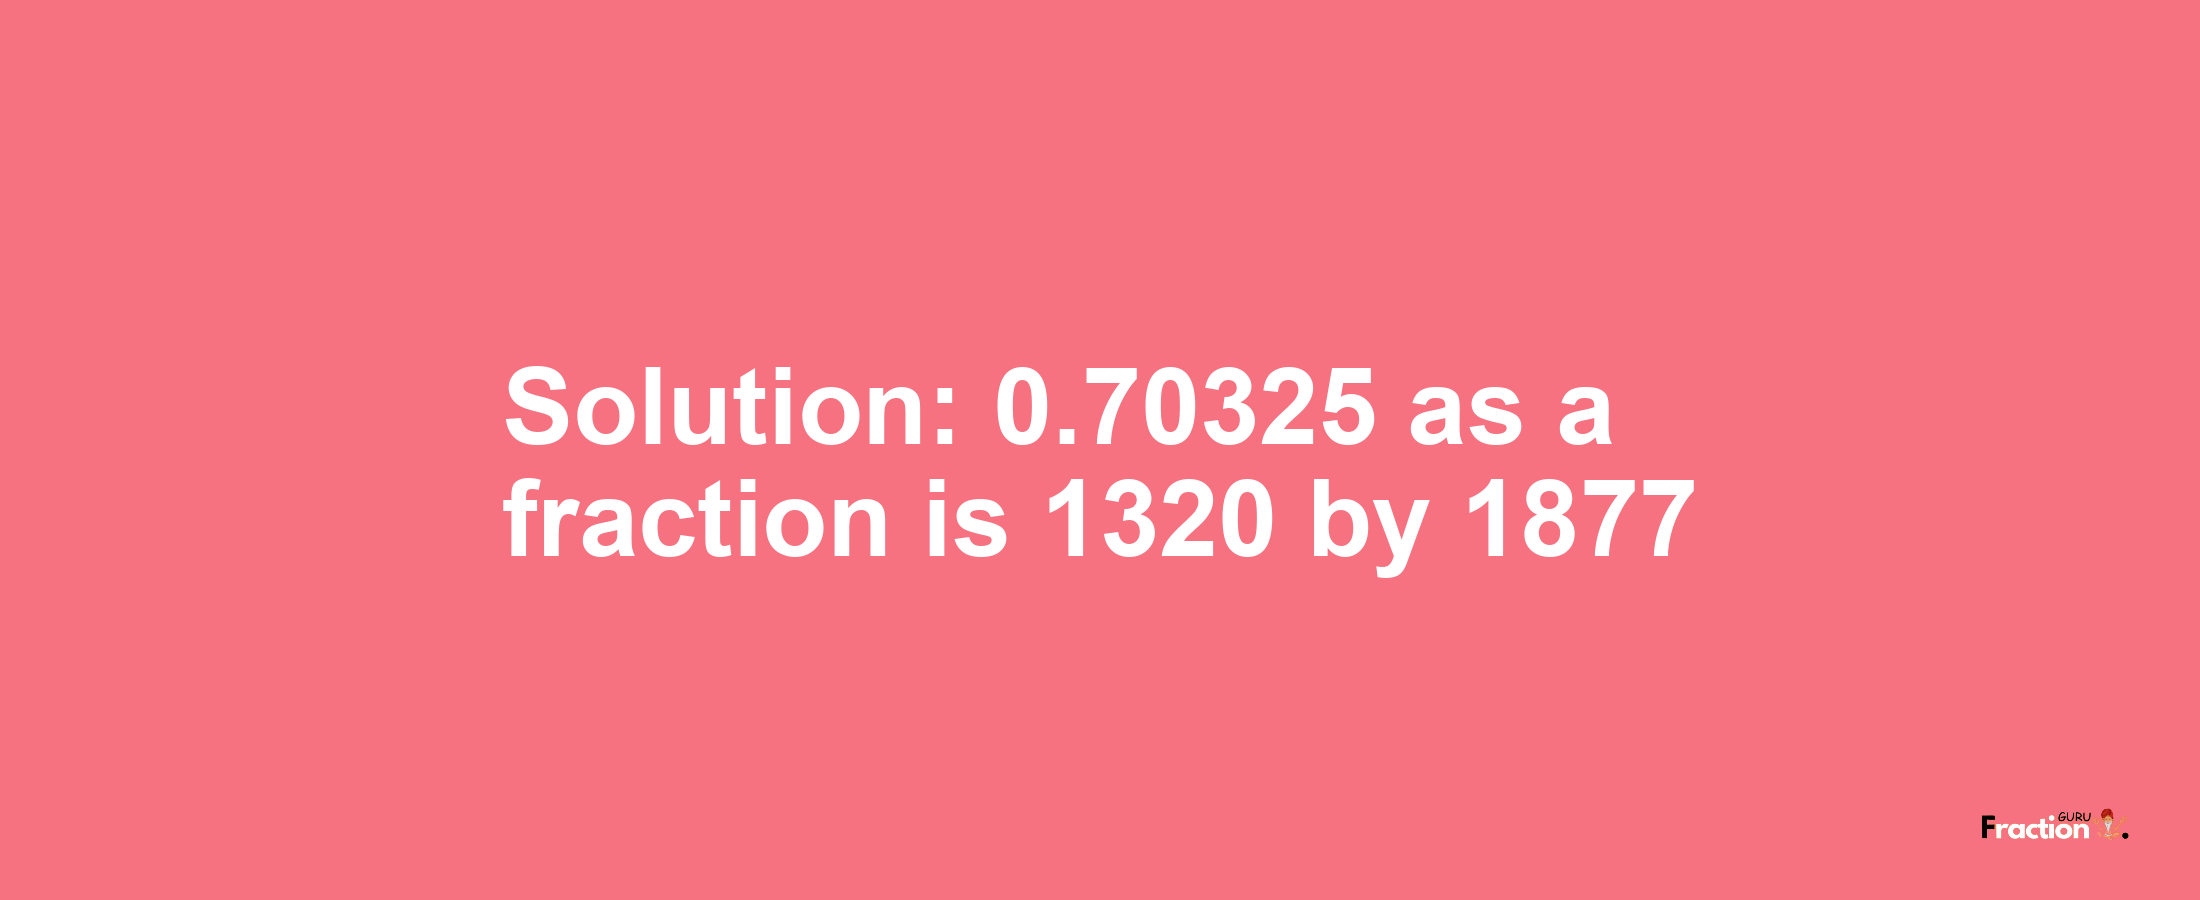 Solution:0.70325 as a fraction is 1320/1877